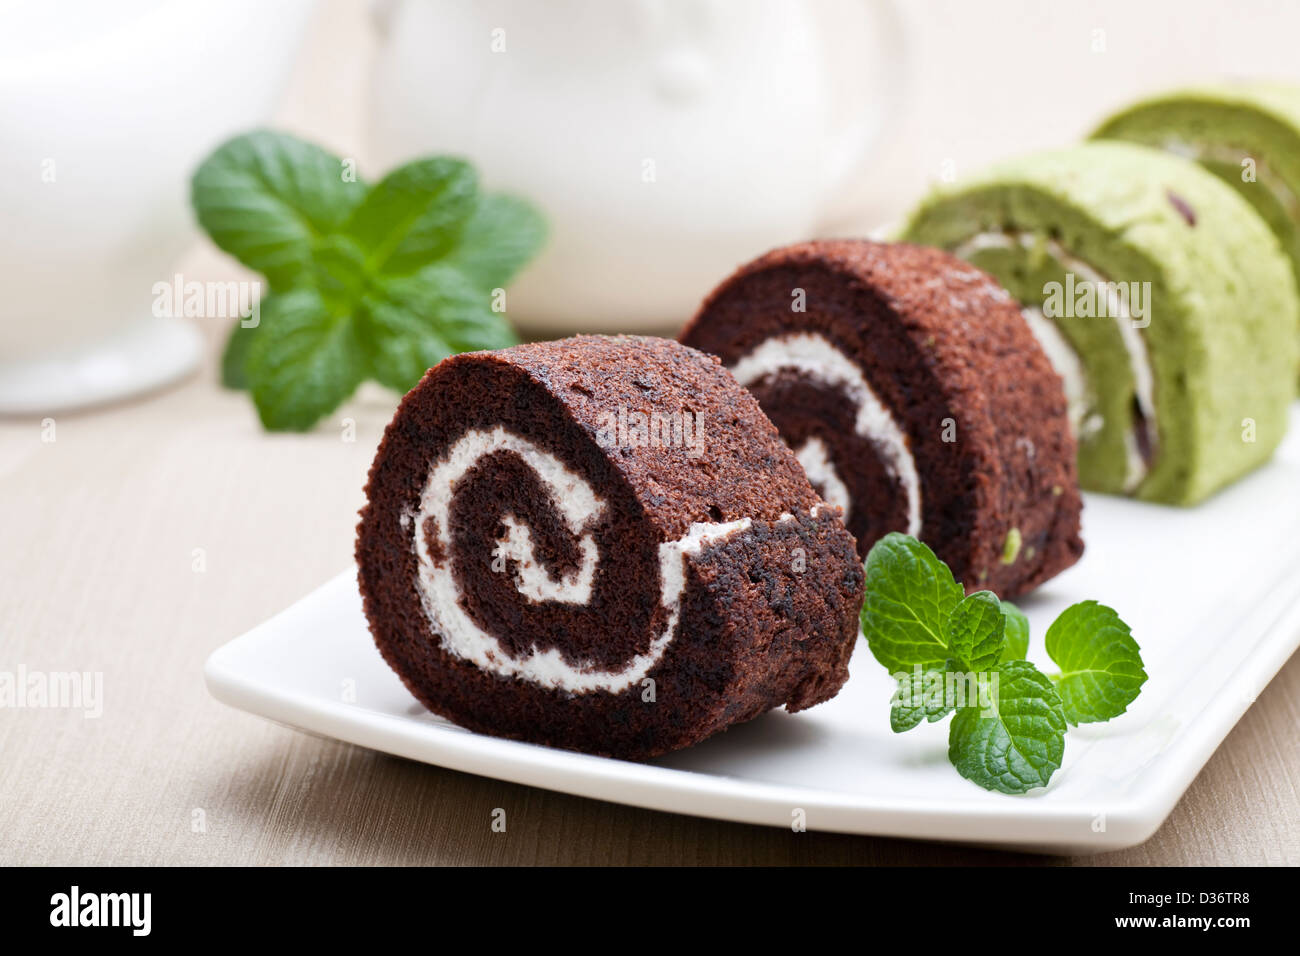 Chocolate swiss roll with green mint leaves Stock Photo